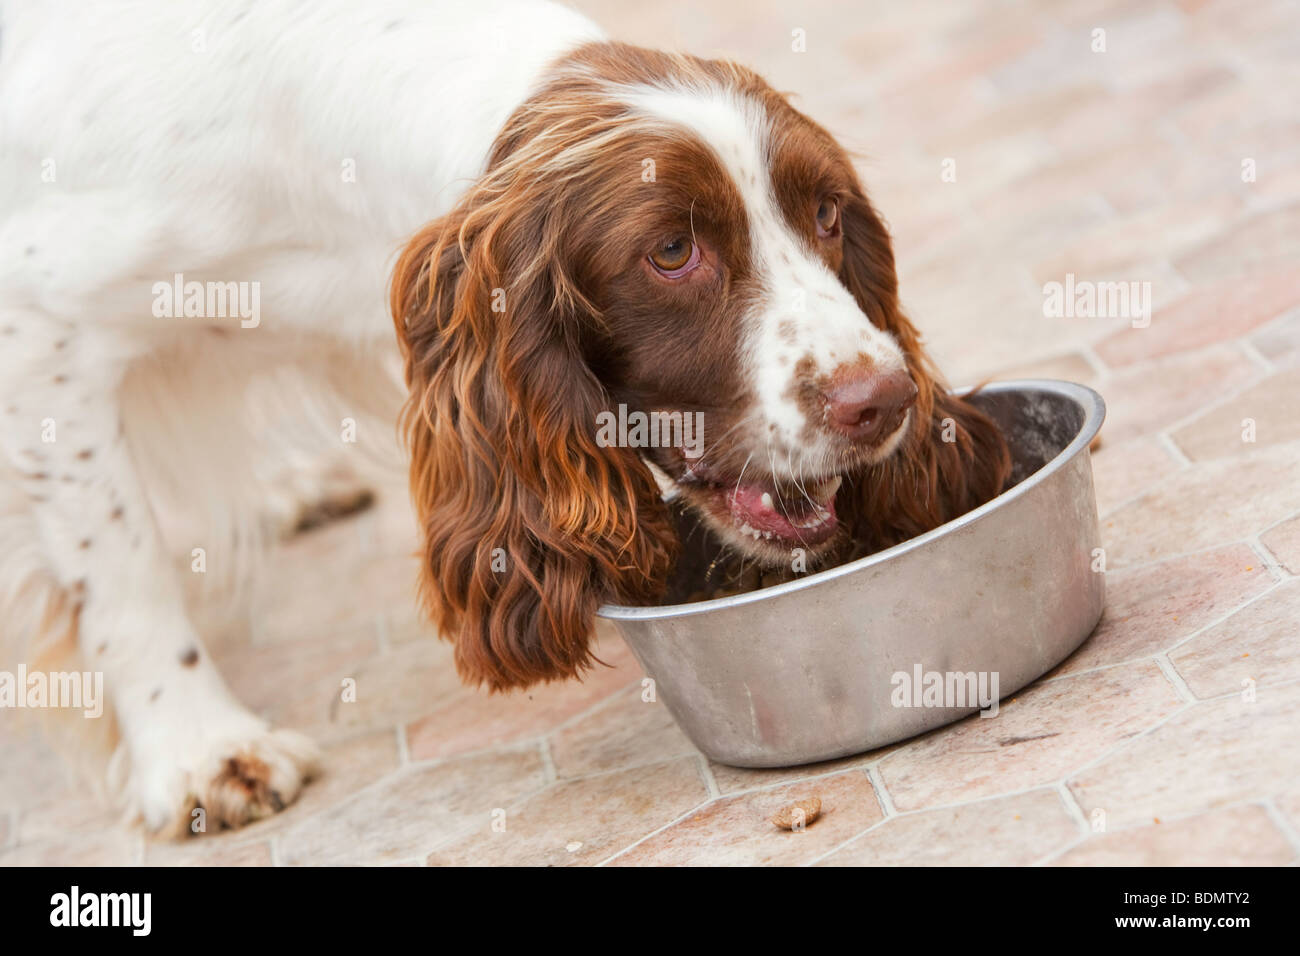 English Springer Spaniel eating dog food from a bowl inside a house Stock Photo